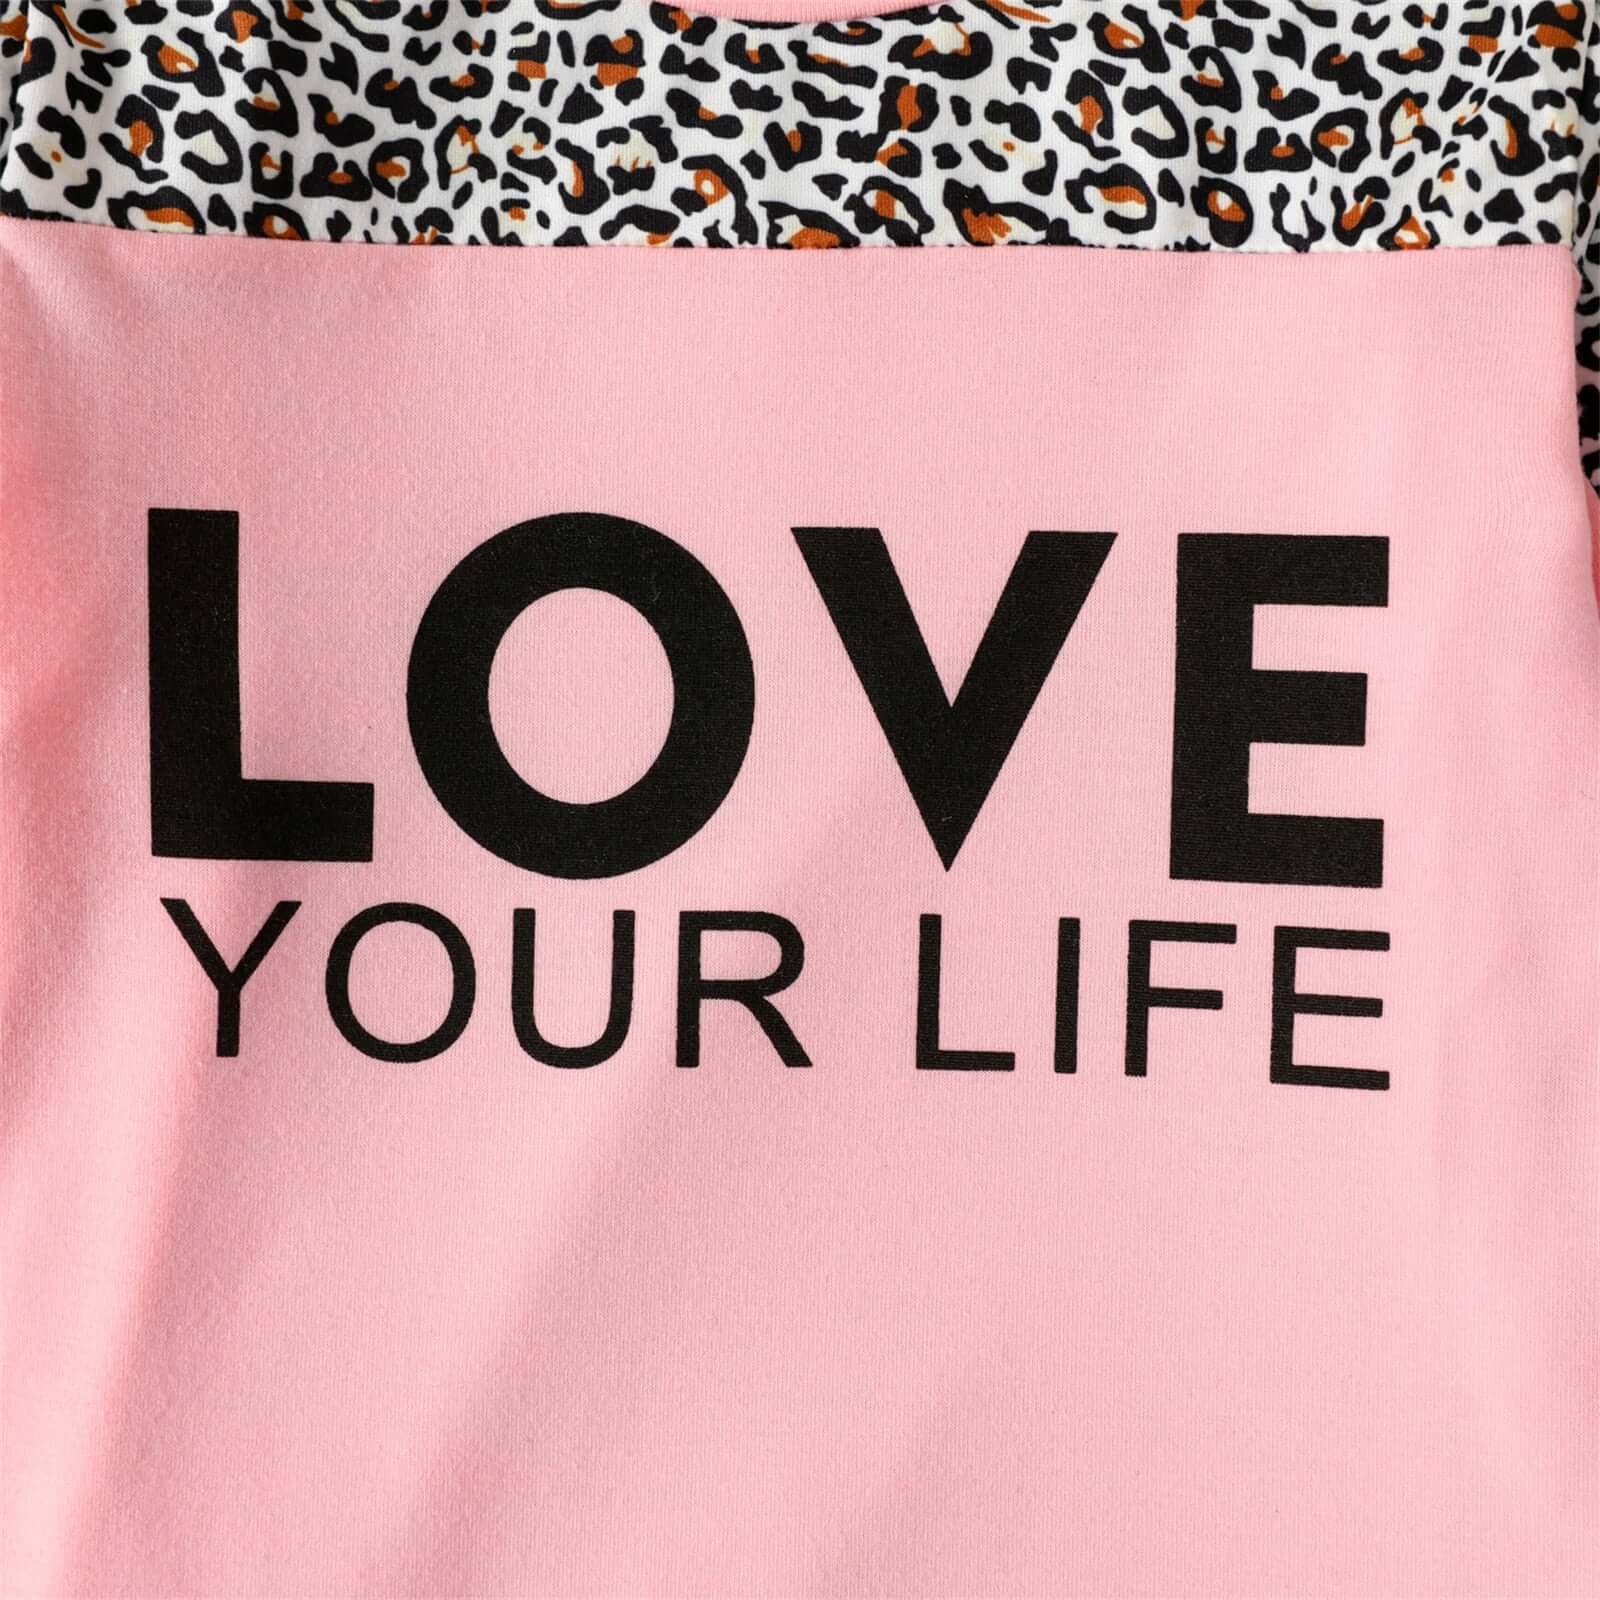 Autumn Toddler Girls Letter"LOVE YOUR LIFE"Sweatsuit